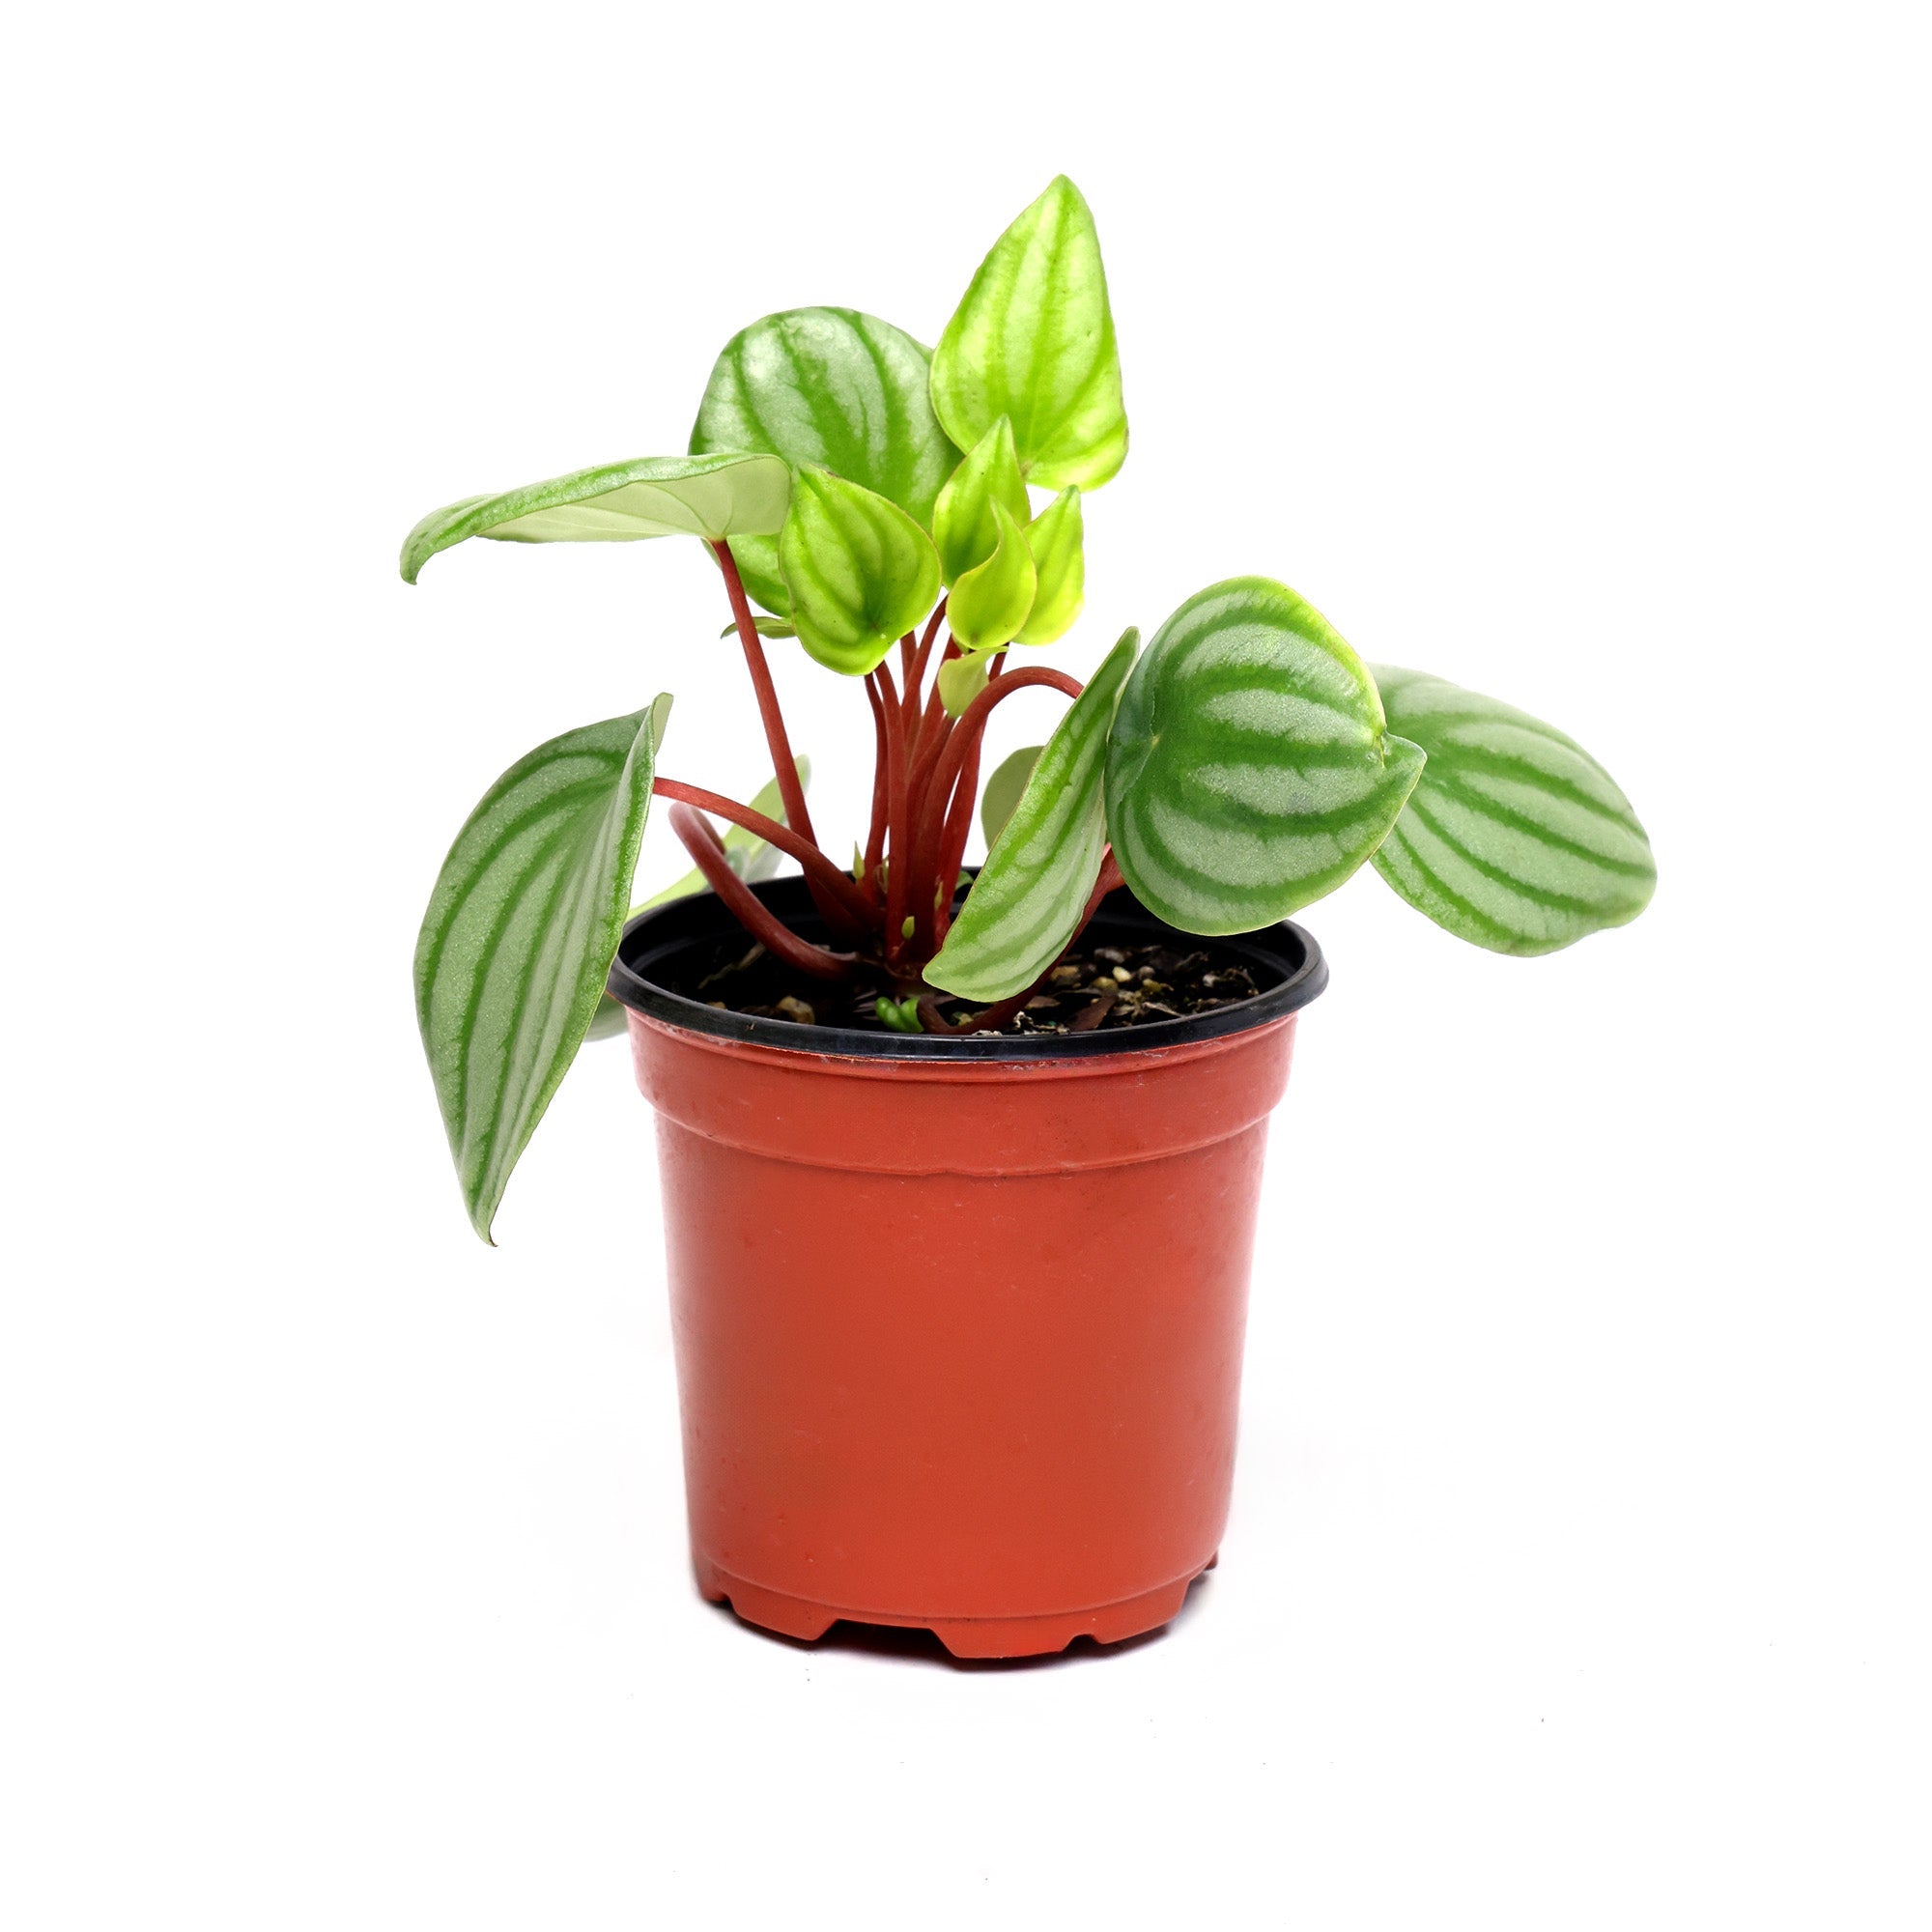 A small potted Peperomia Watermelon 4 Inch Pot by Chive Studio 2024 with vibrant green, oval-shaped leaves featuring light green to white stripes. The houseplant is housed in a simple red-brown plastic pot with visible soil at the base. The plant's stems are reddish, adding contrast to the foliage, perfect for indoor gardening enthusiasts.